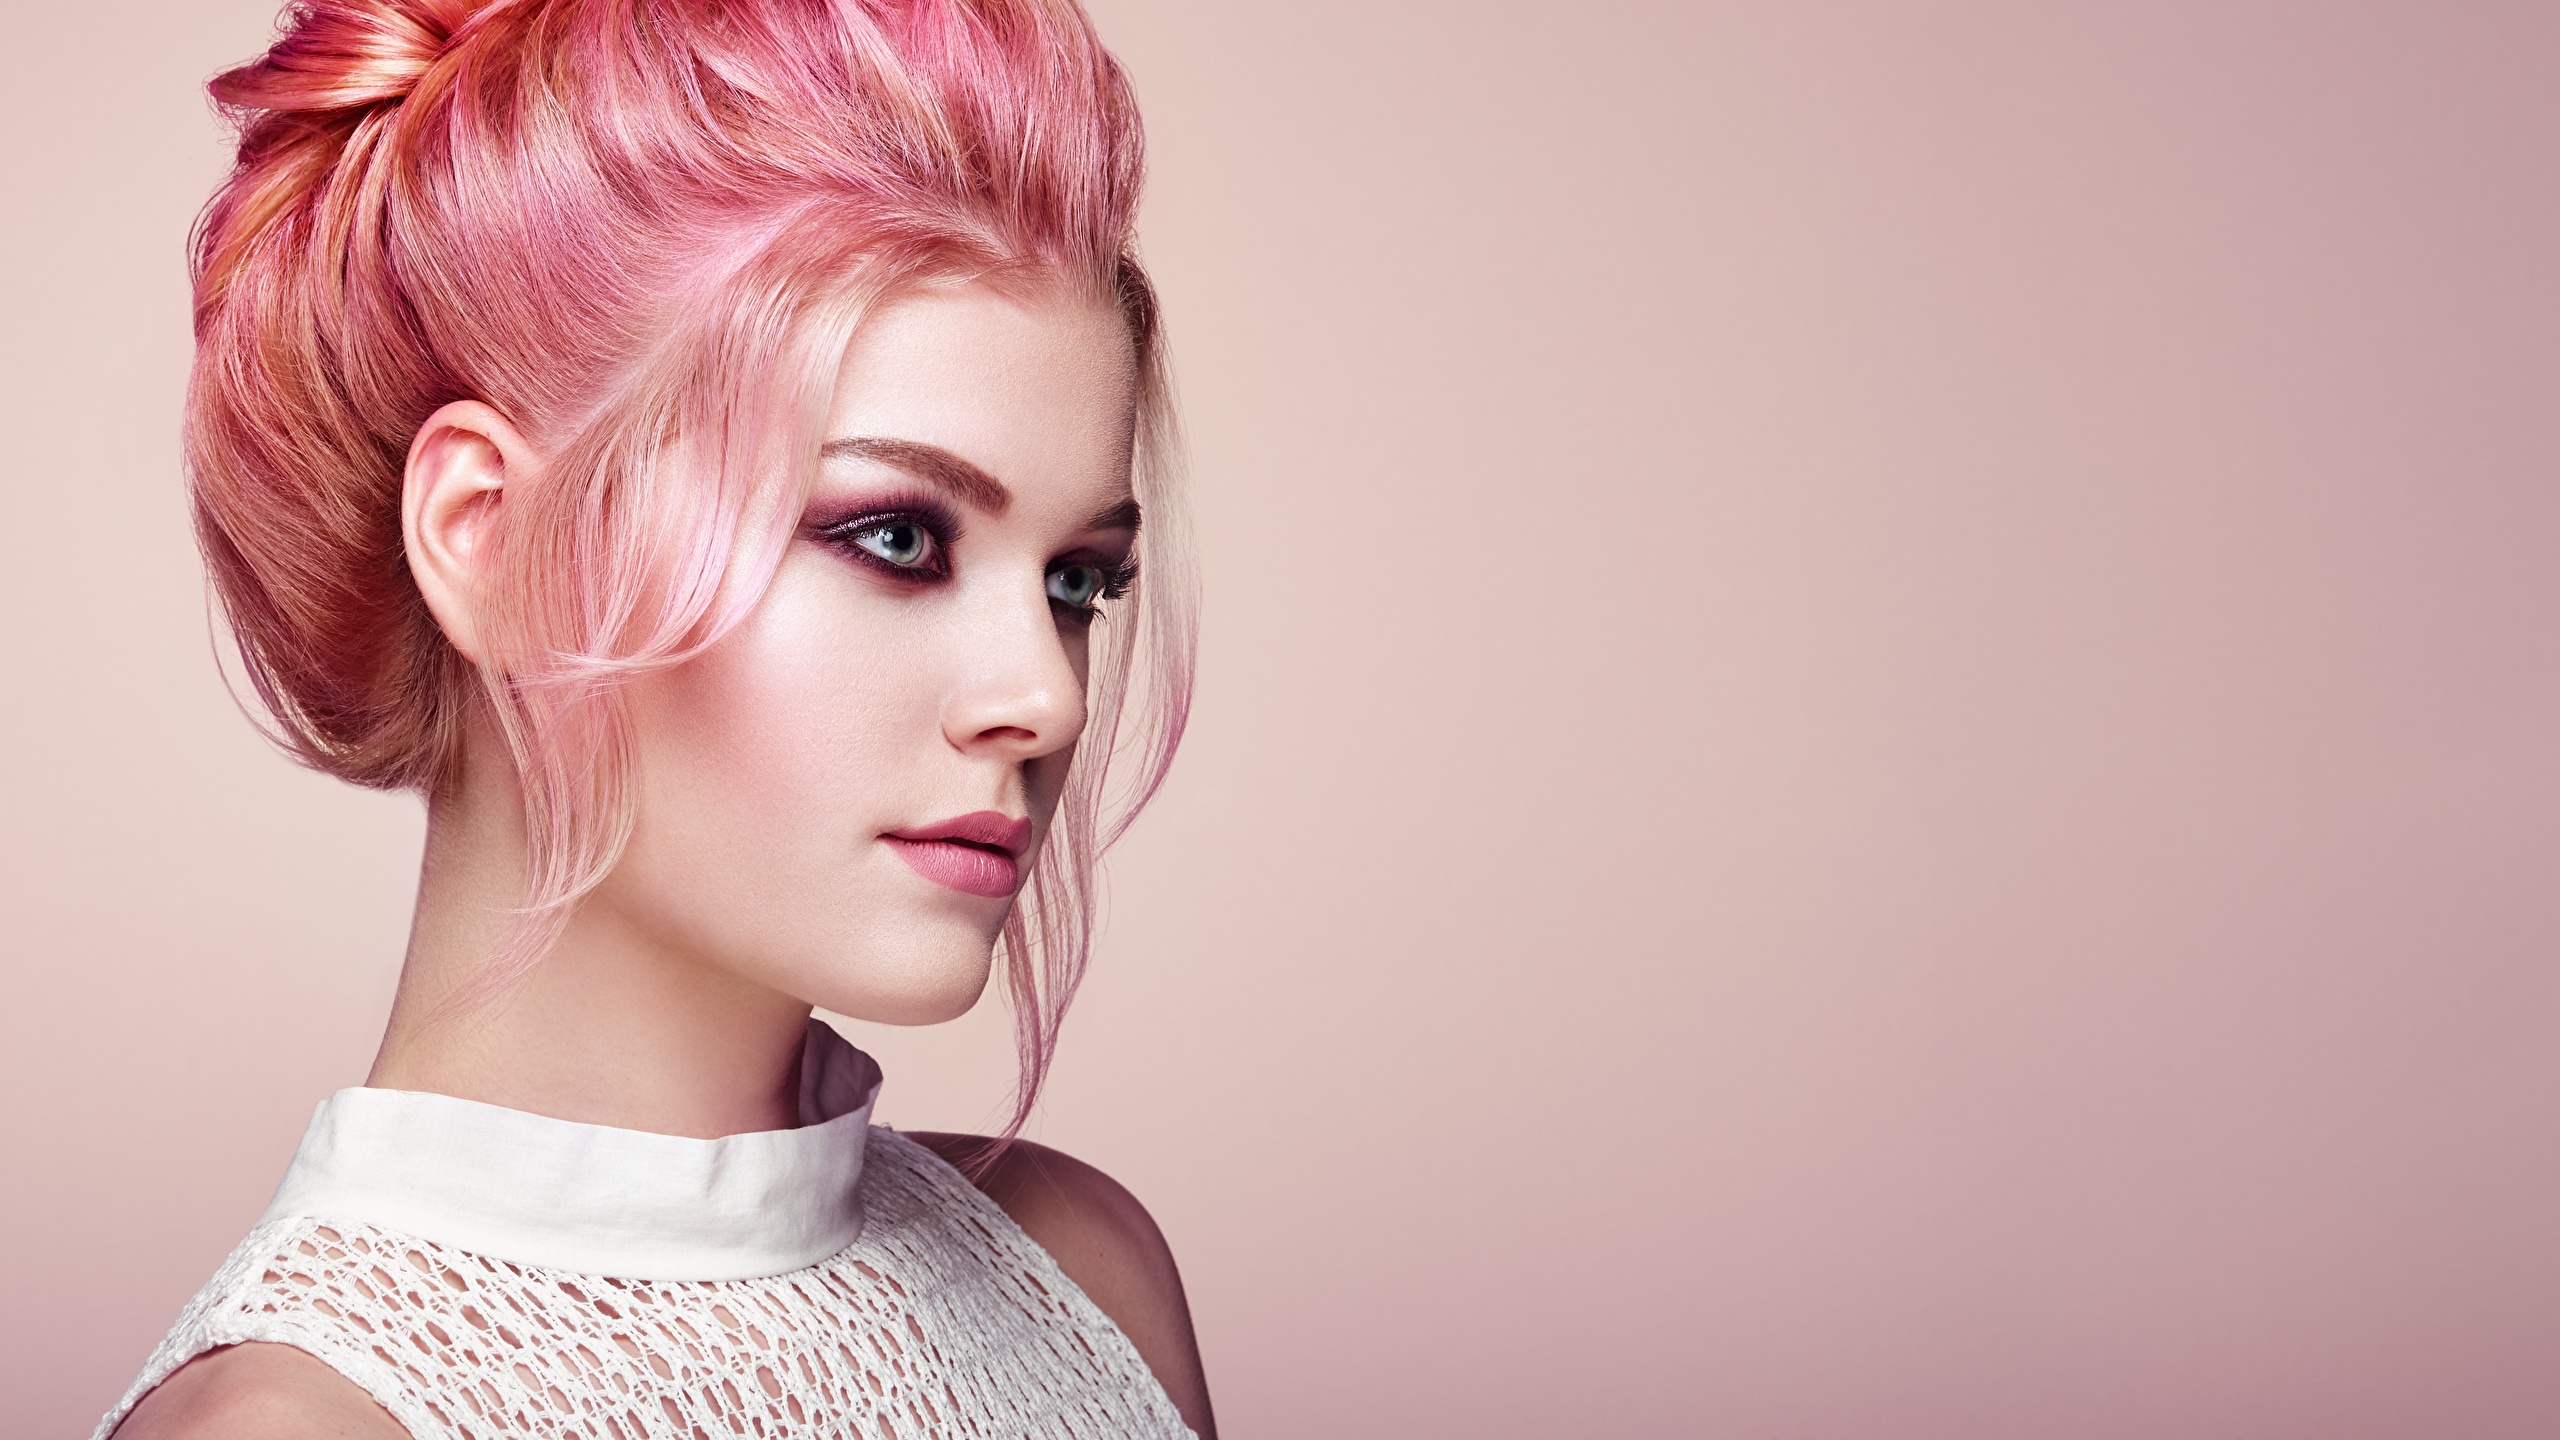 Makeup Looks With Pink Hair - HD Wallpaper 